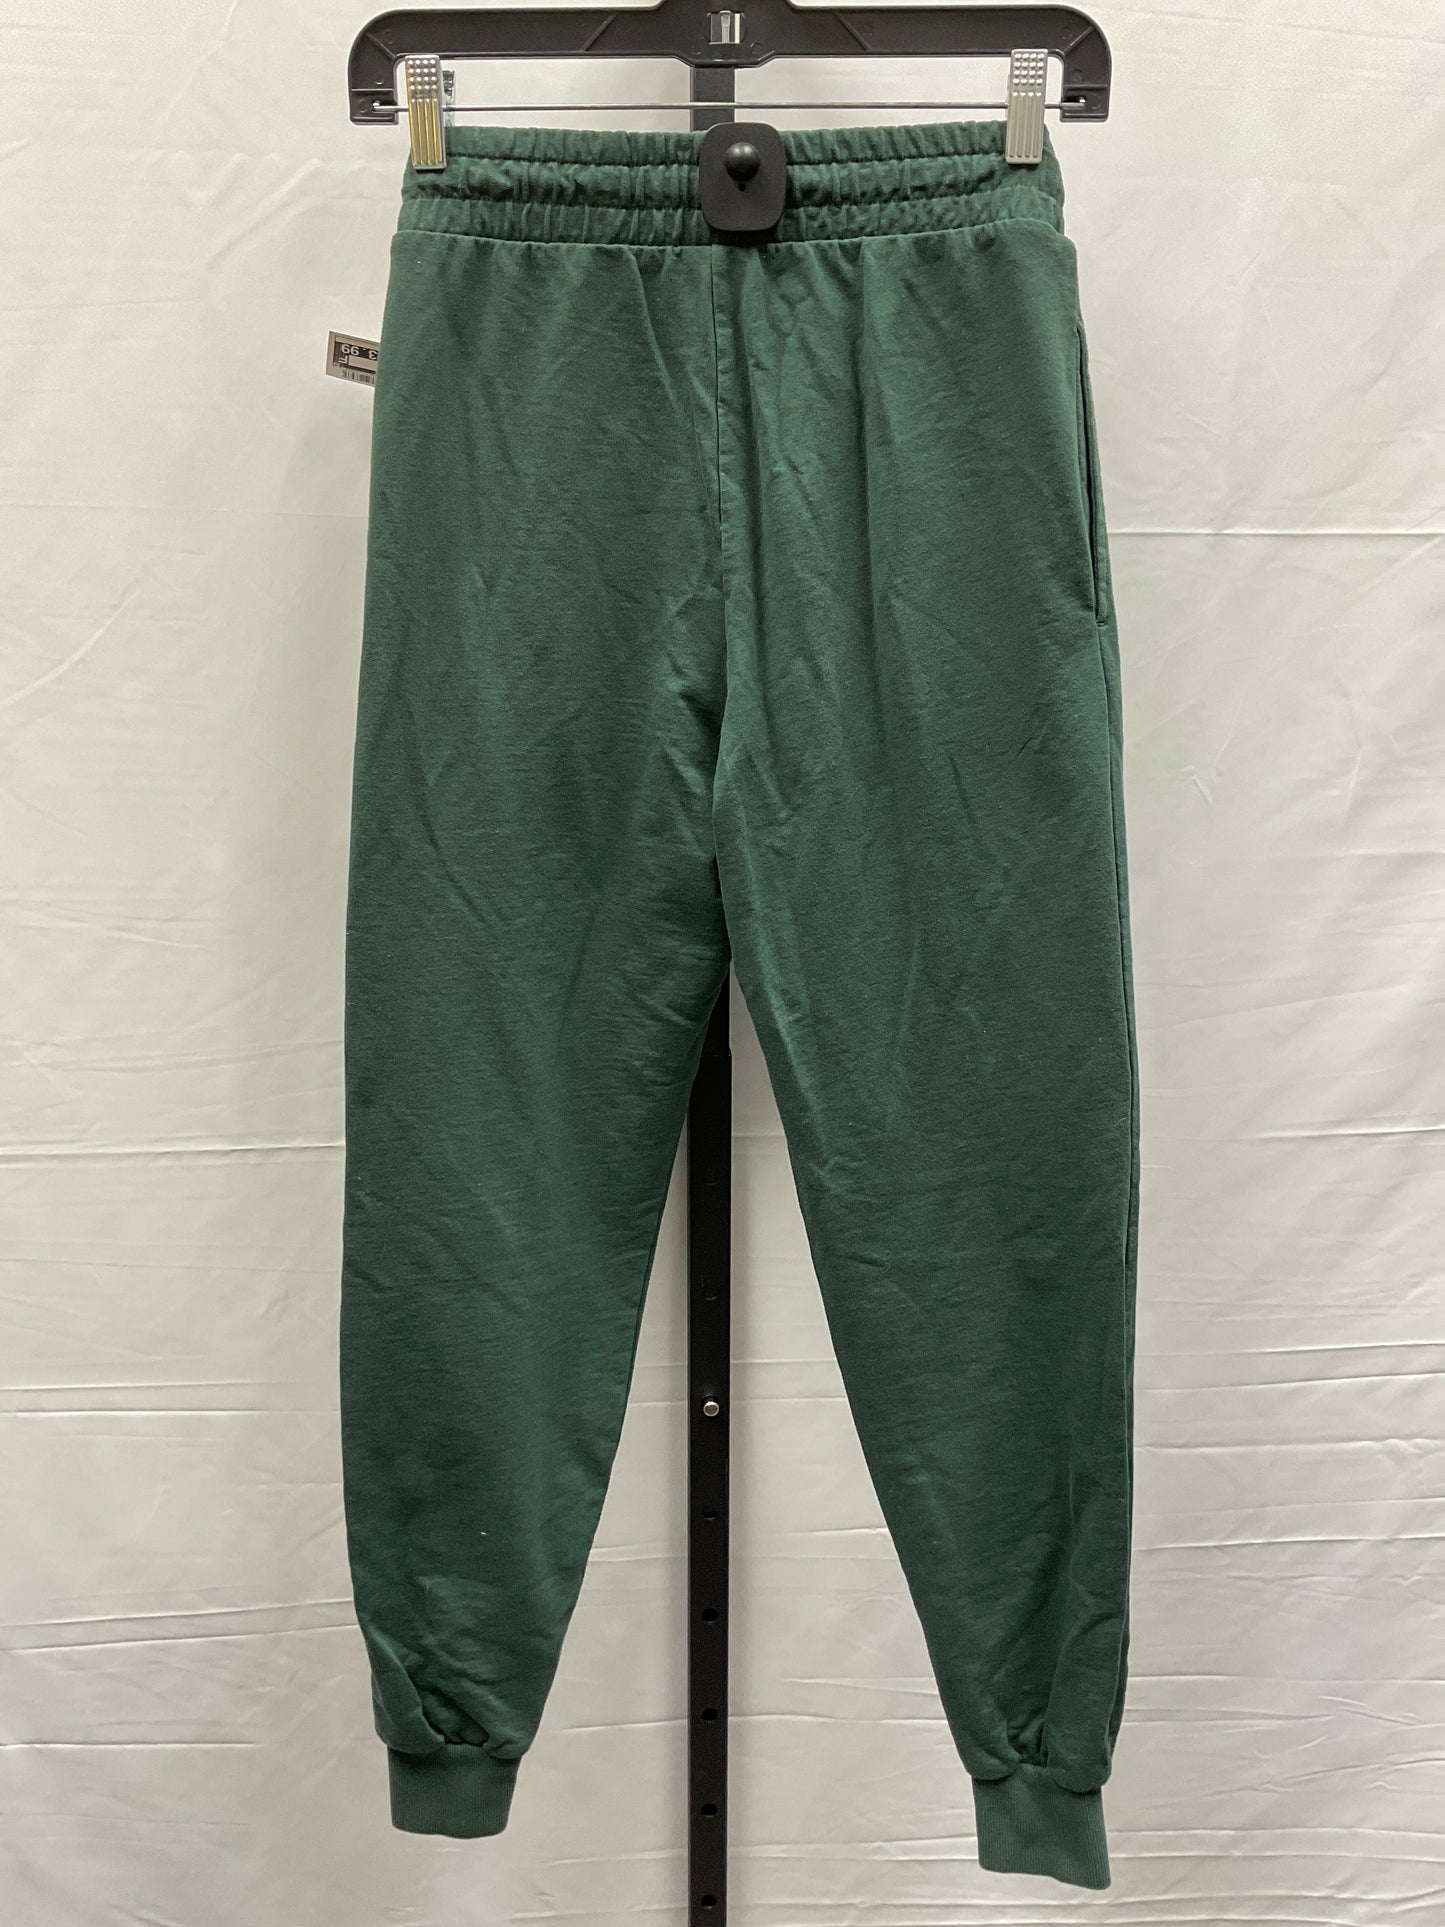 Green Athletic Pants Gym Shark, Size Xs